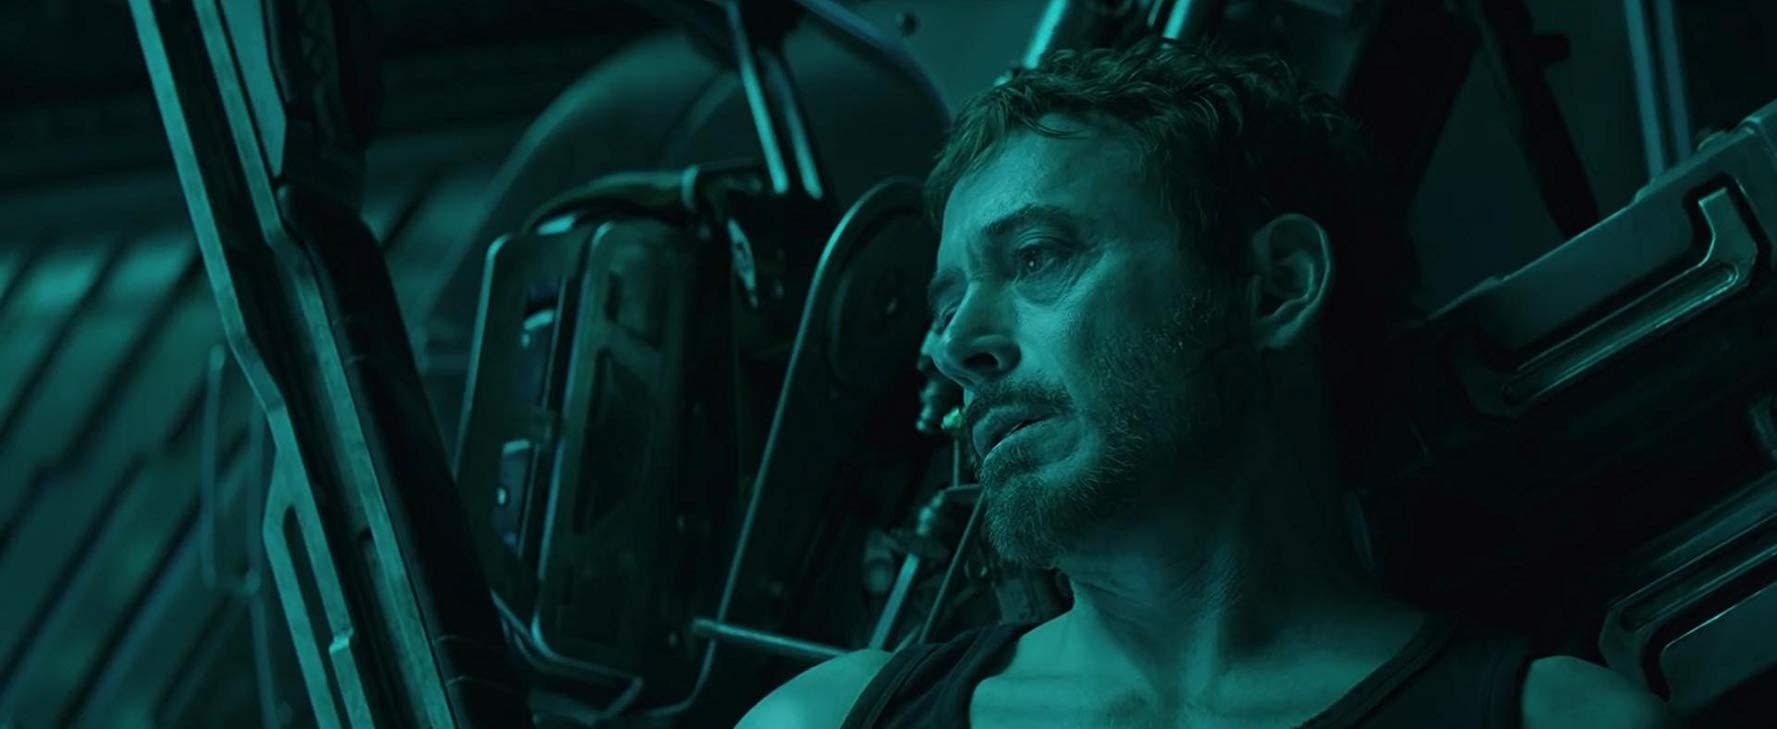 [Very] Early Estimates Say Avengers: Endgame Could Make $2B at the Worldwide Box Office